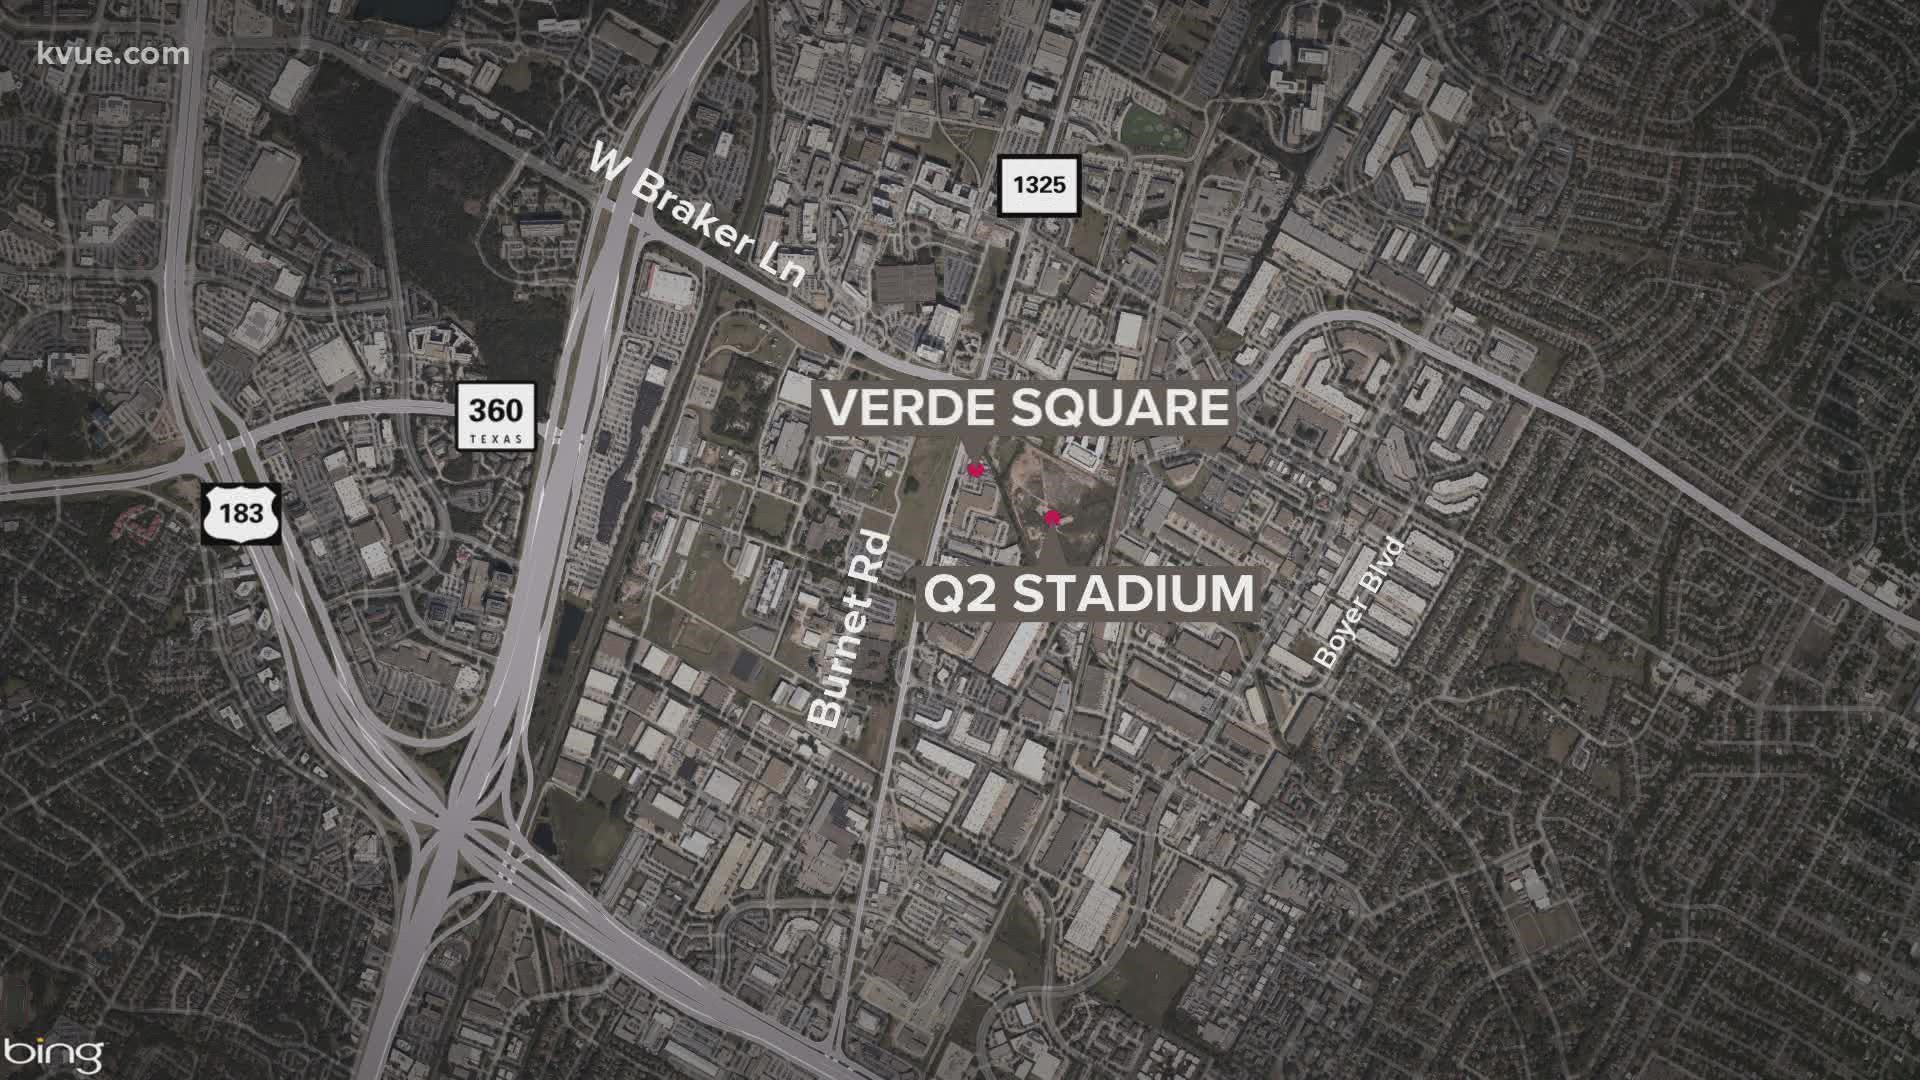 A mixed-use development called Verde Square is in the works. It would be located near Q2 Stadium.